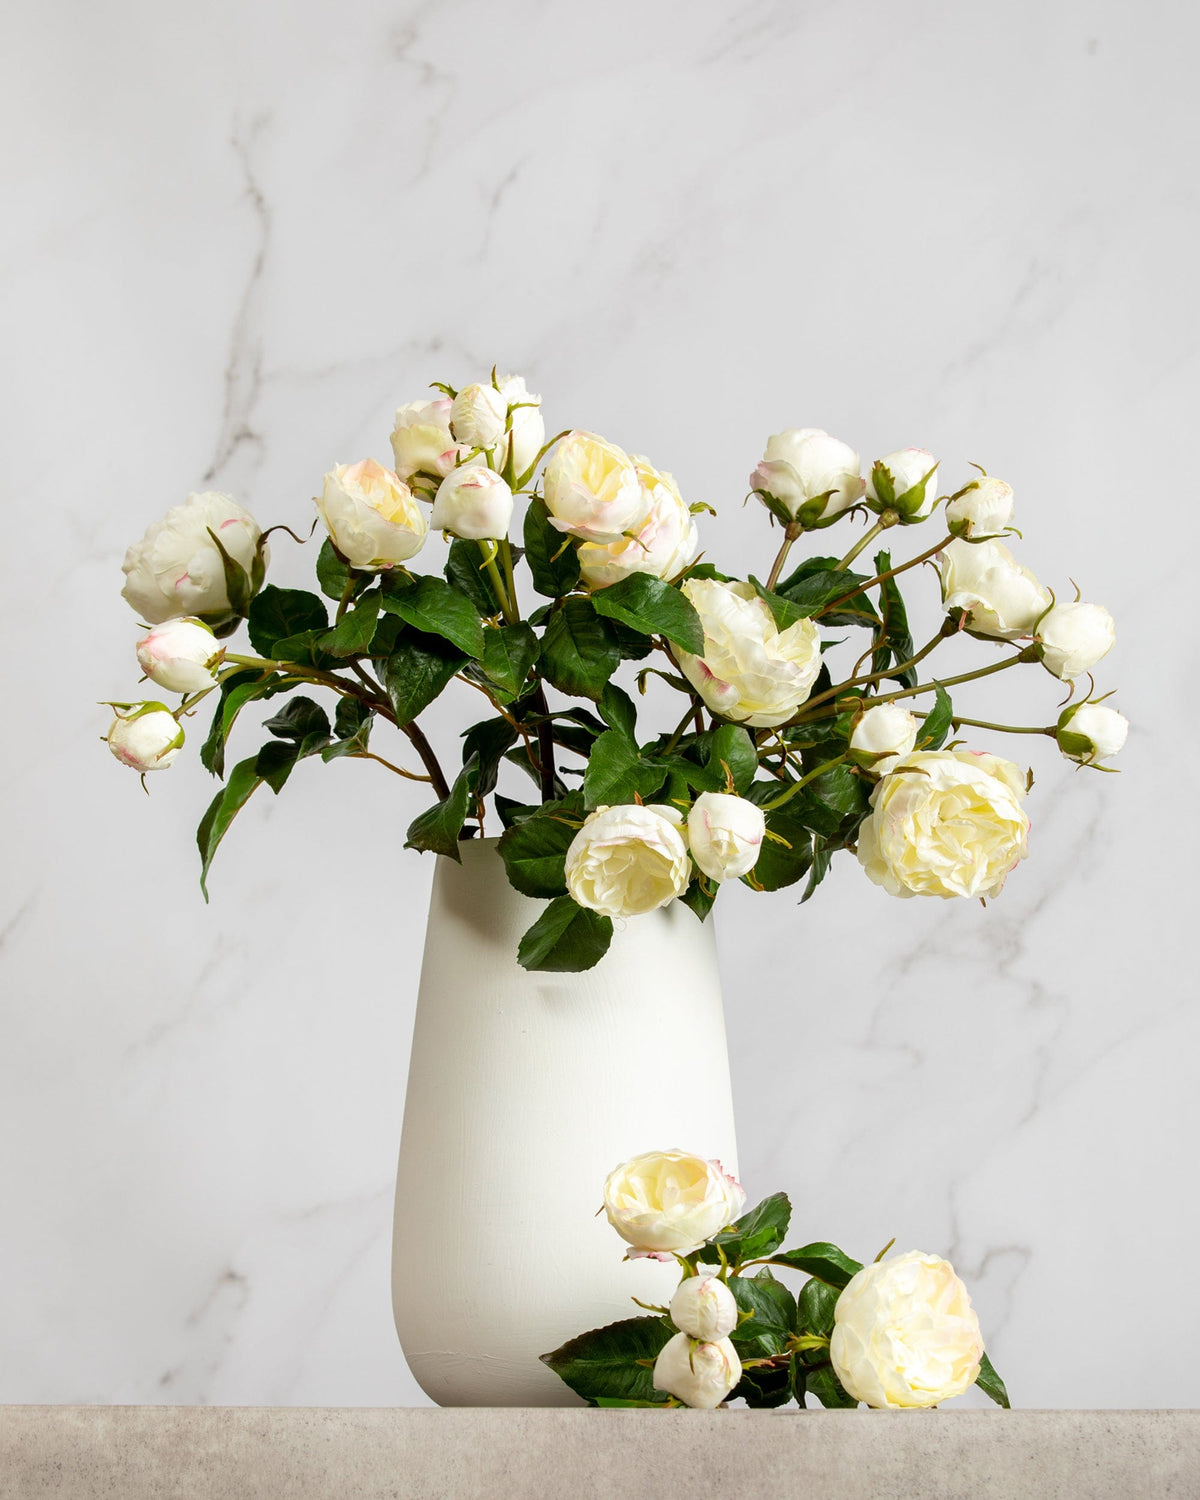 Prestige Botanicals Artificial White English Roses in a white vase